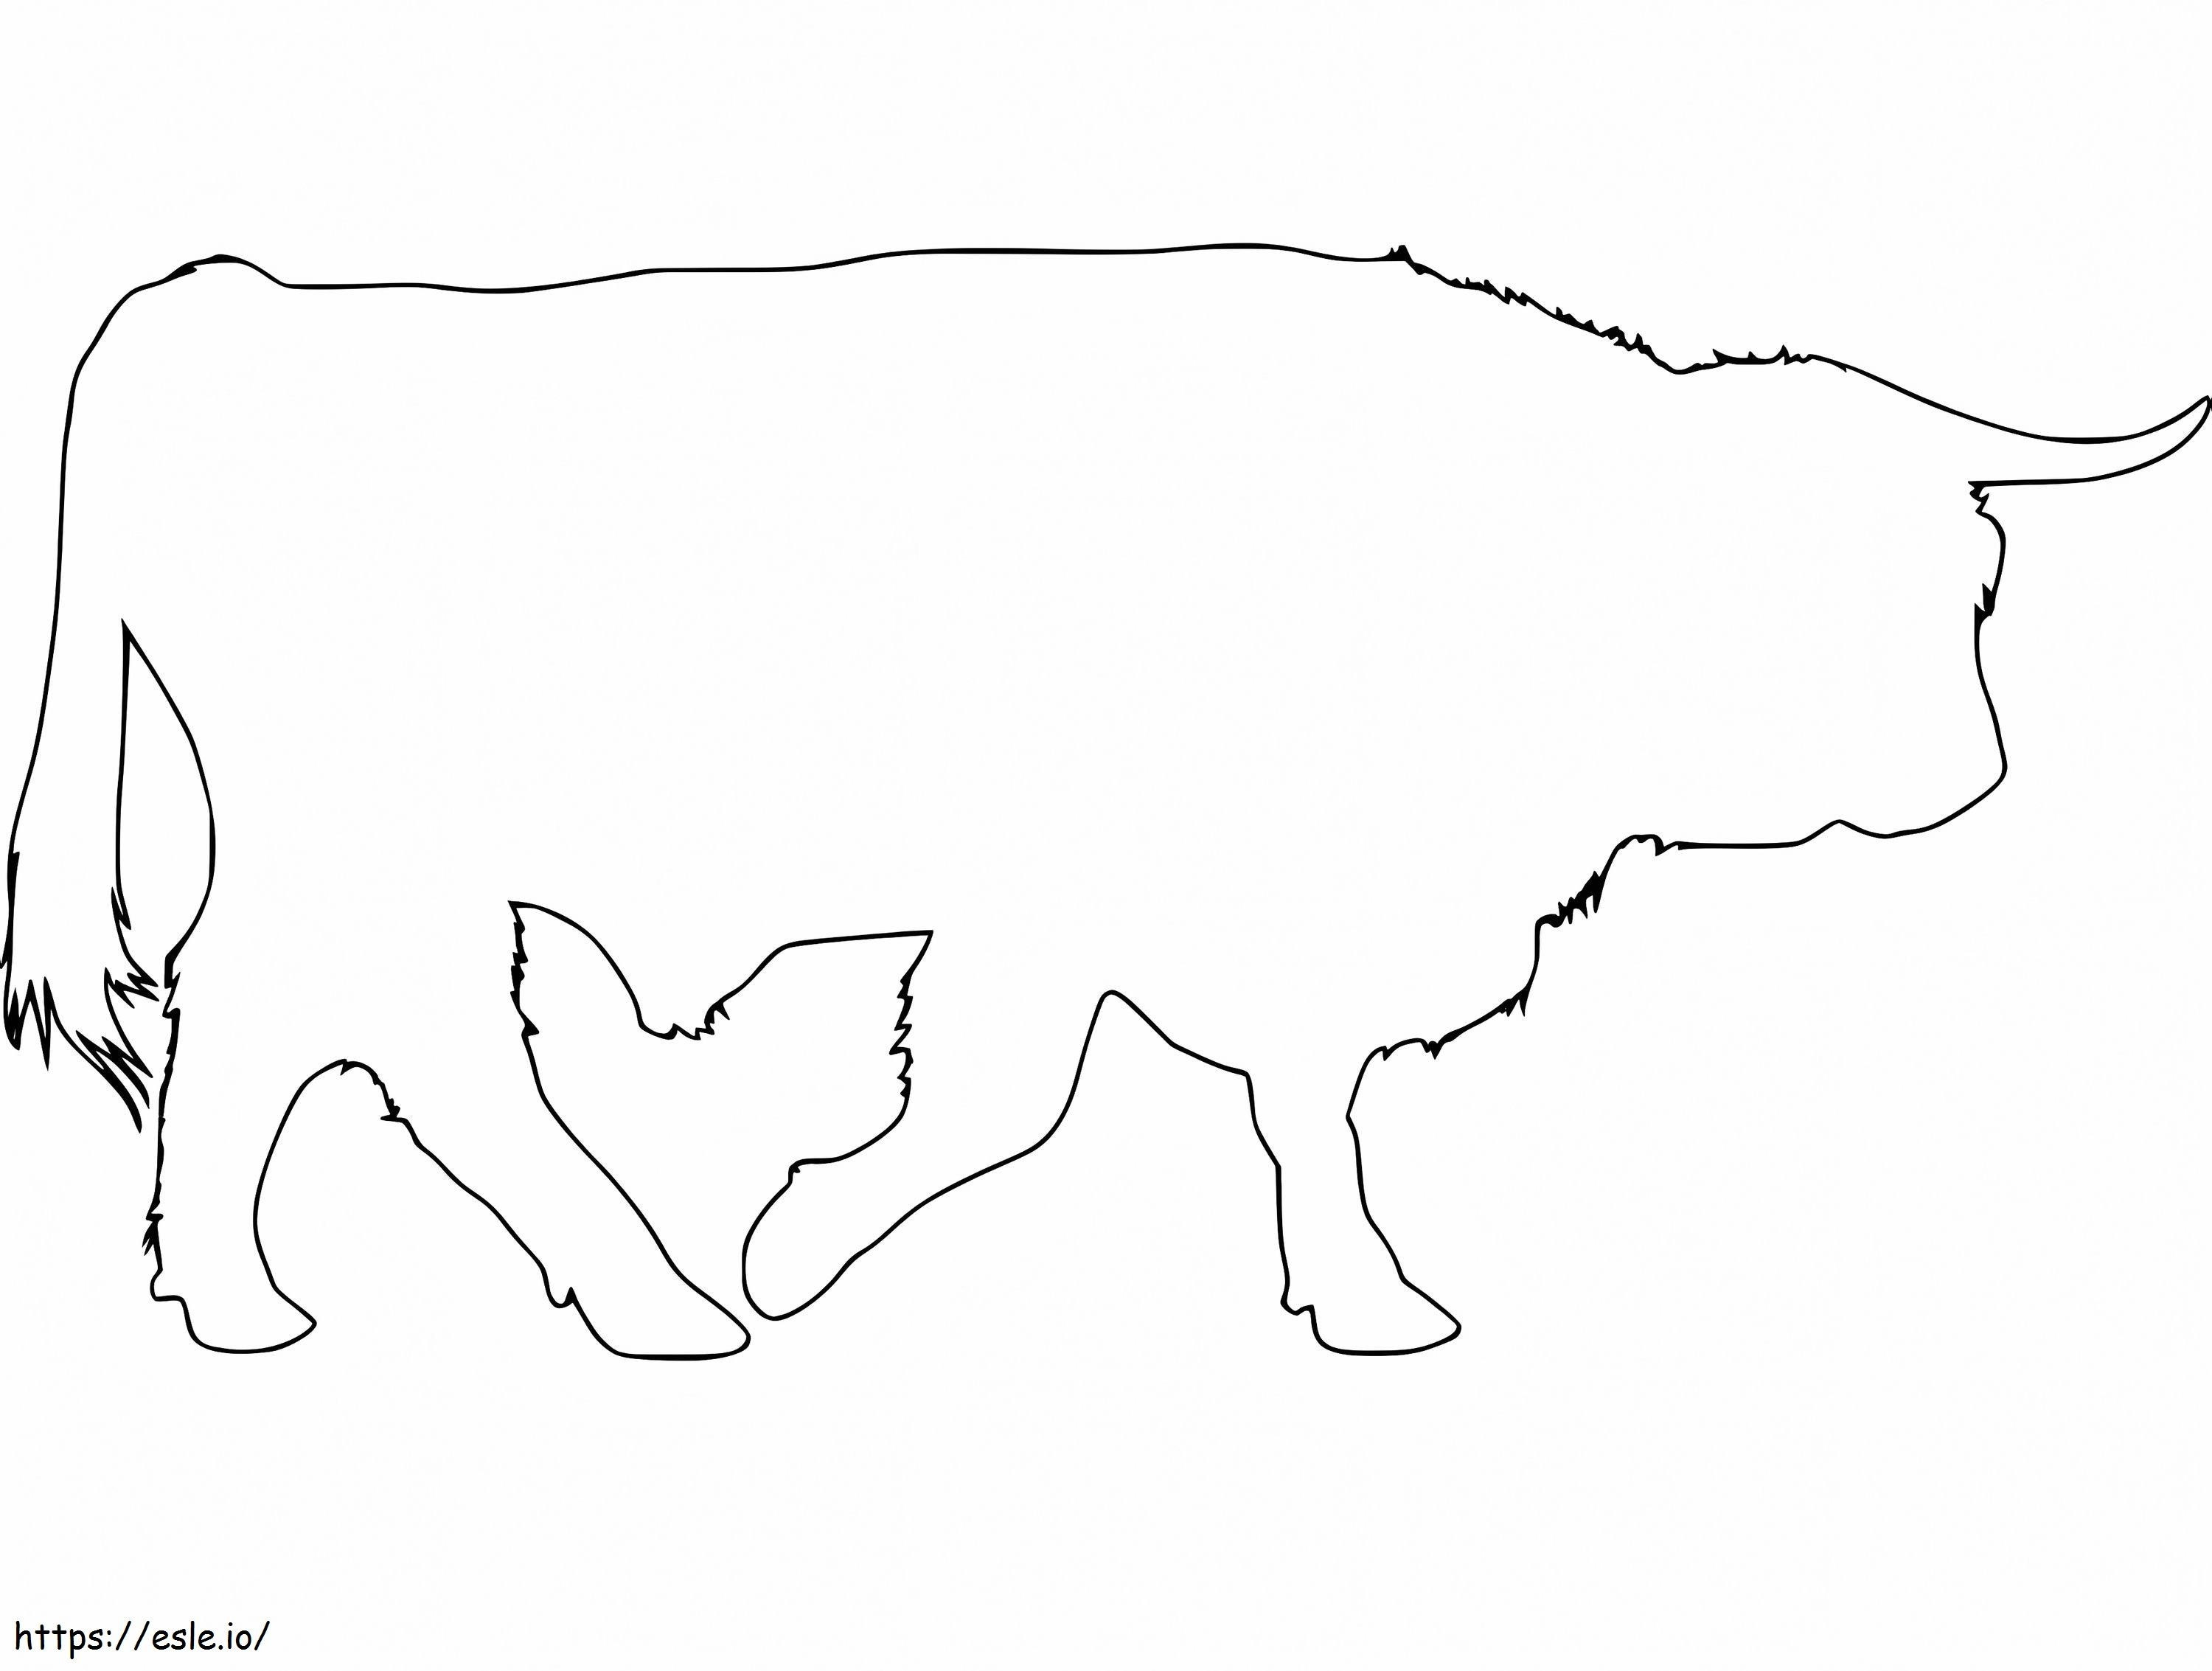 Ox Outline coloring page